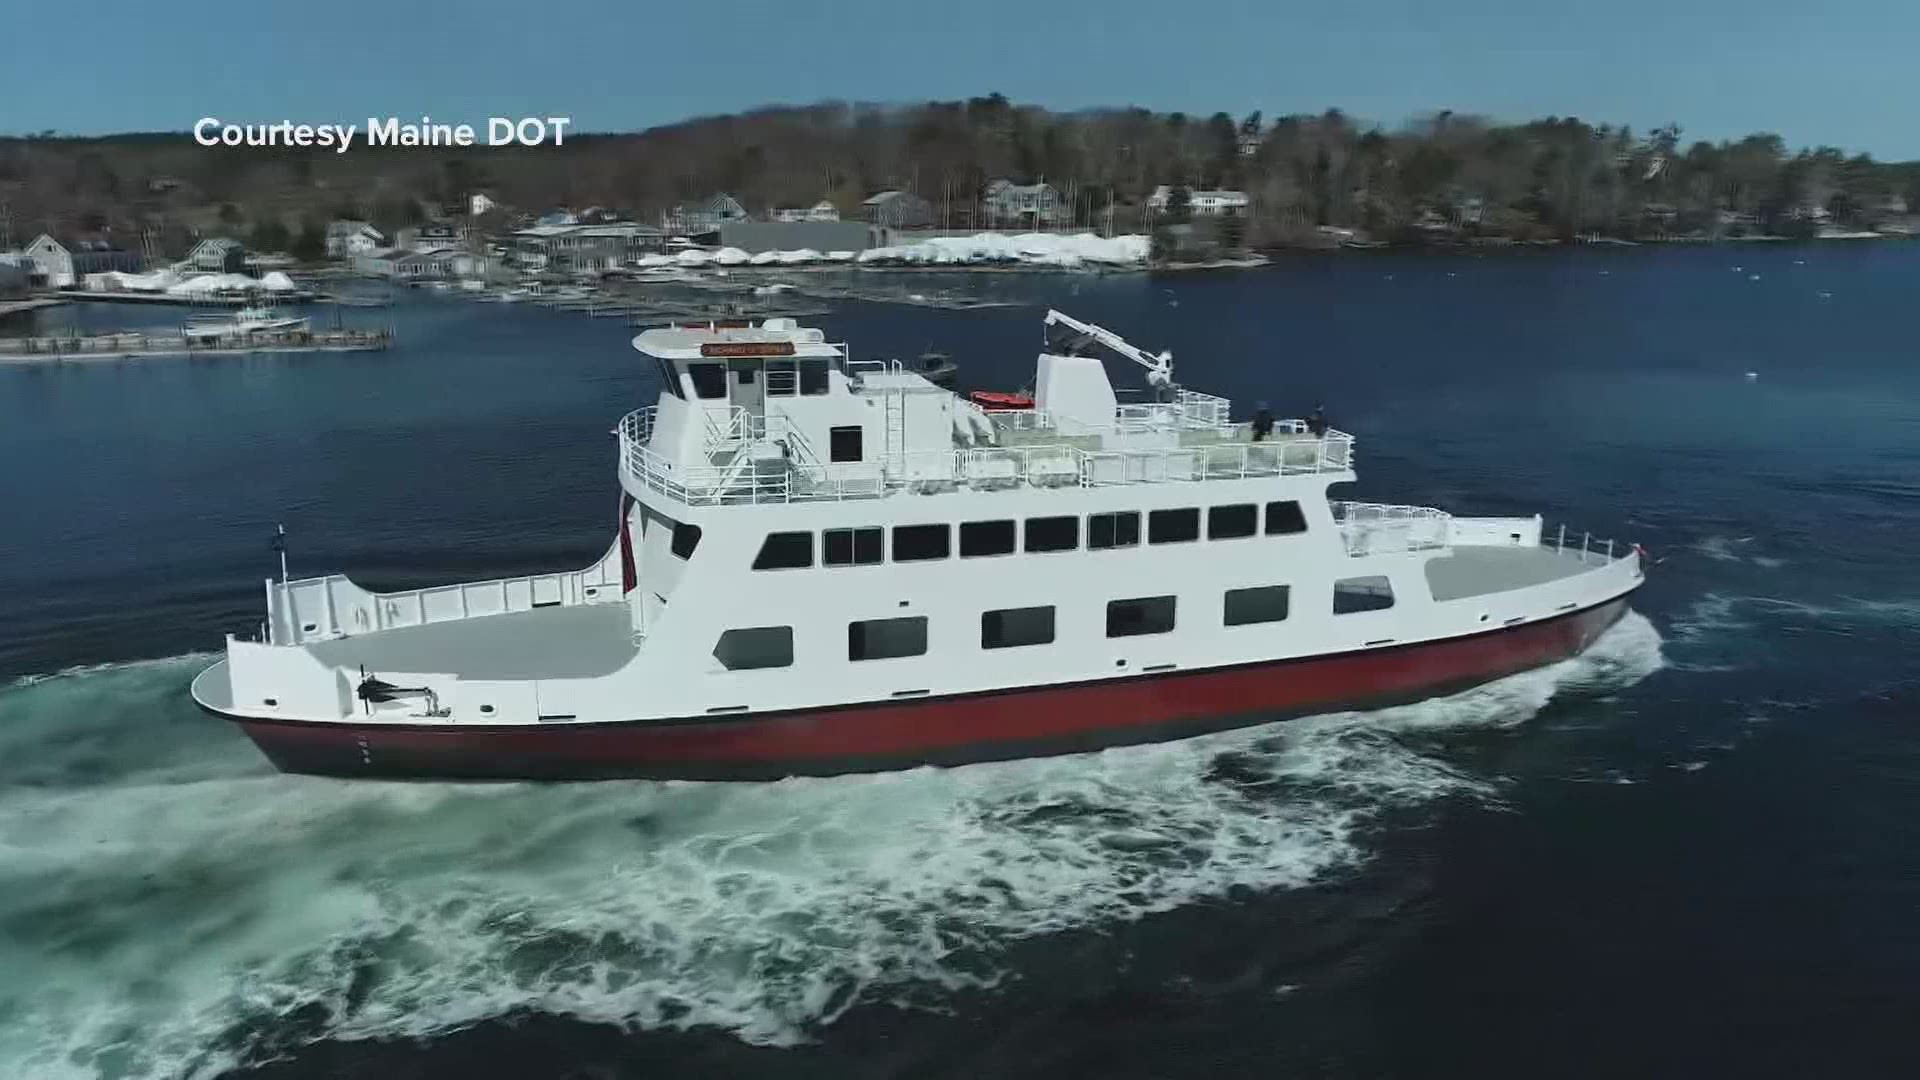 Today in East Boothbay they launched a new boat for the state of Maine -- a brand new ferry.